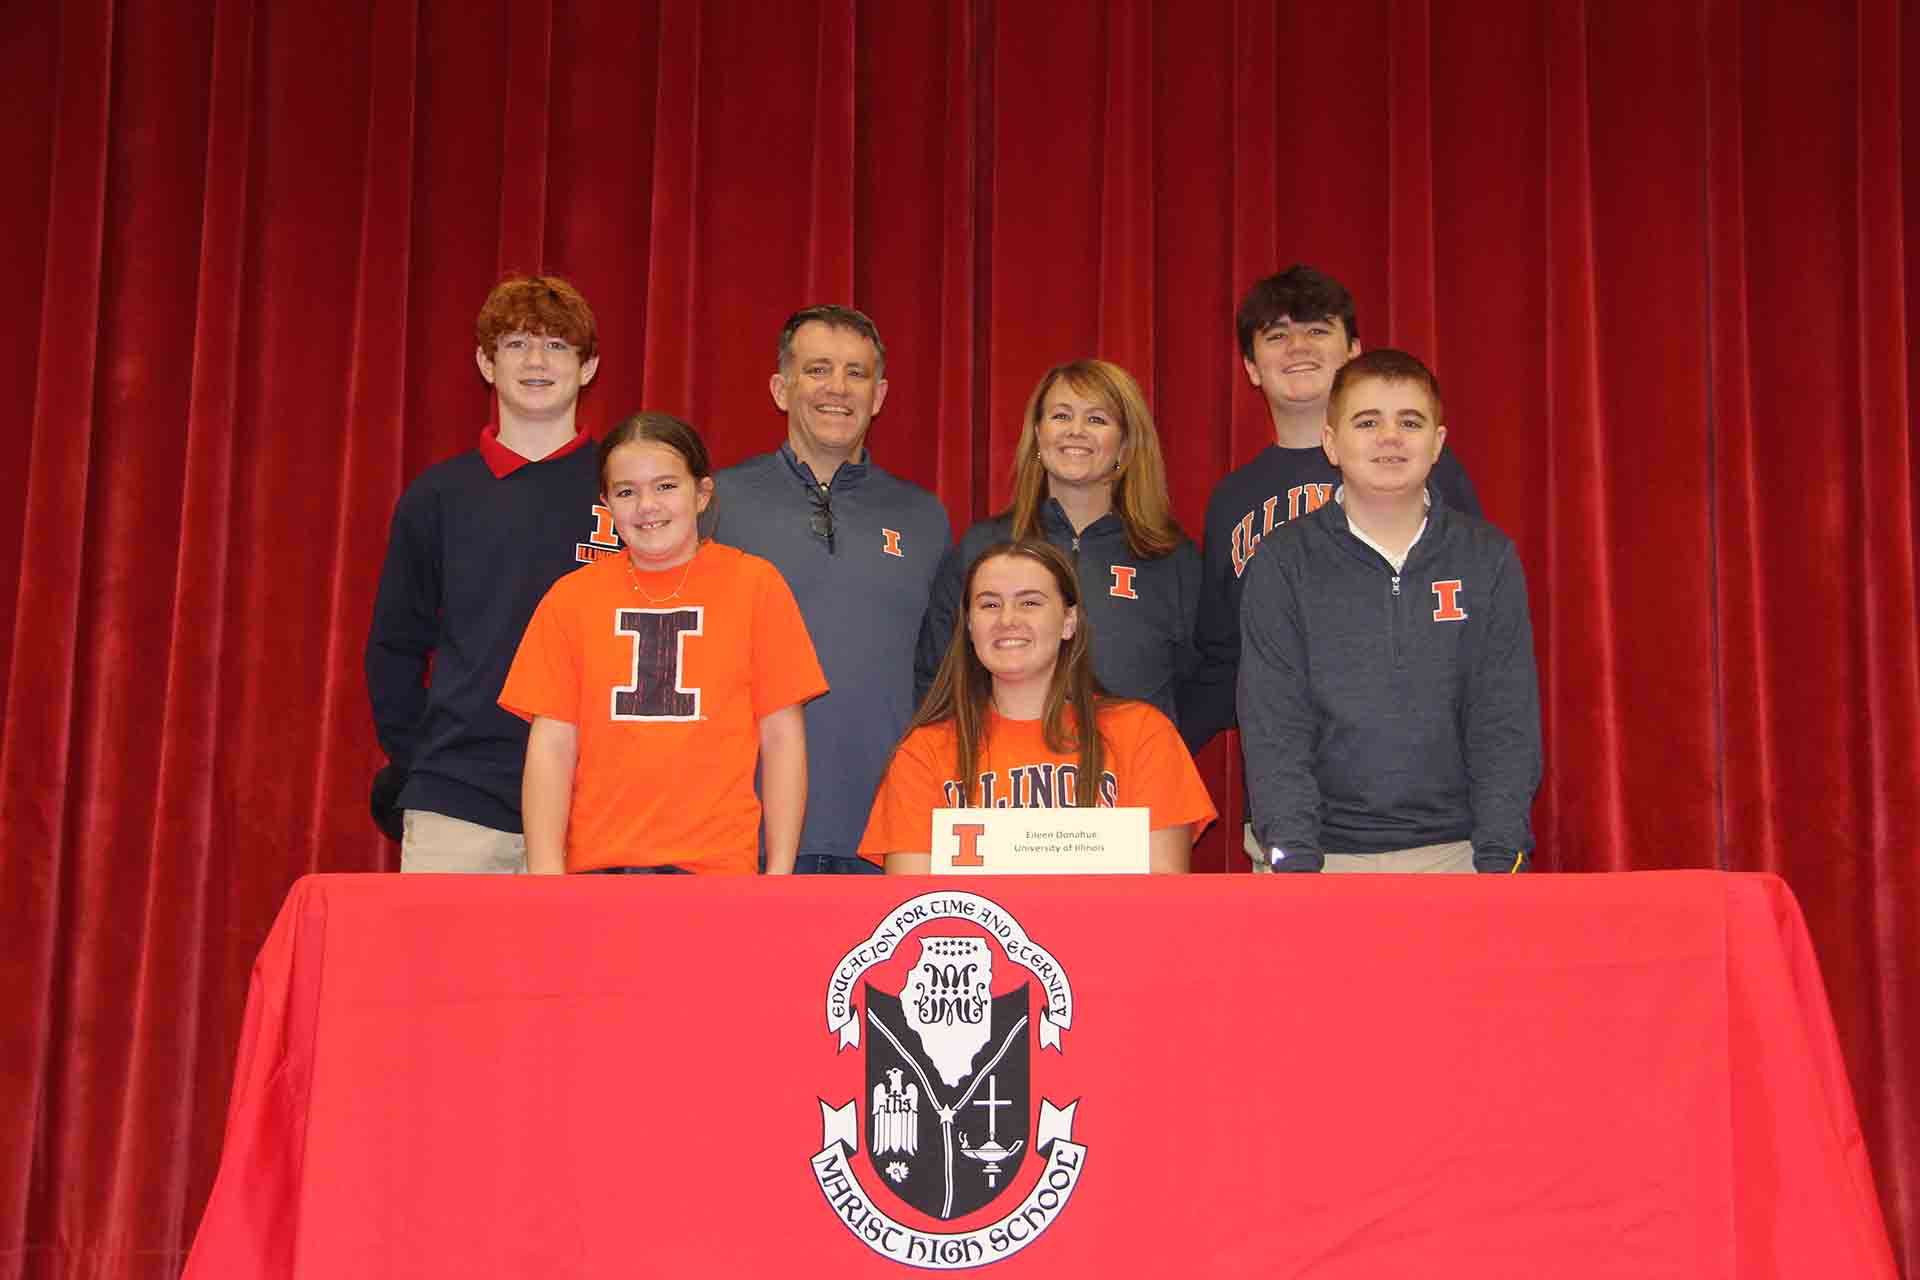 student-wears-university-of-illinois-merch-with-family-at-signing